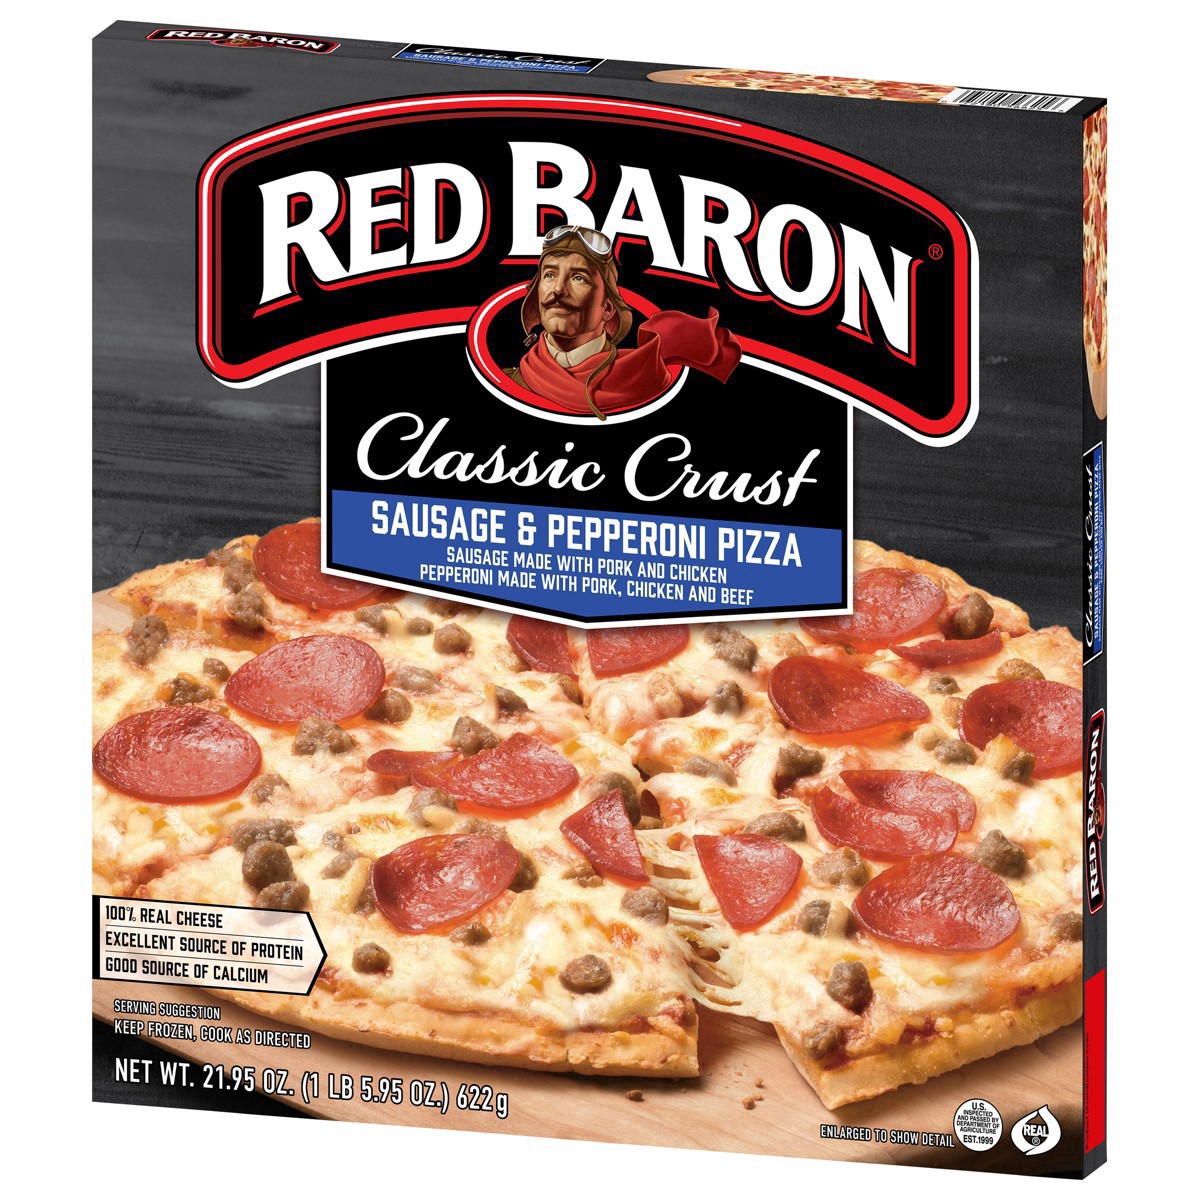 slide 6 of 49, Red Baron Frozen Pizza Classic Crust Sausage & Pepperoni, 21.95 oz